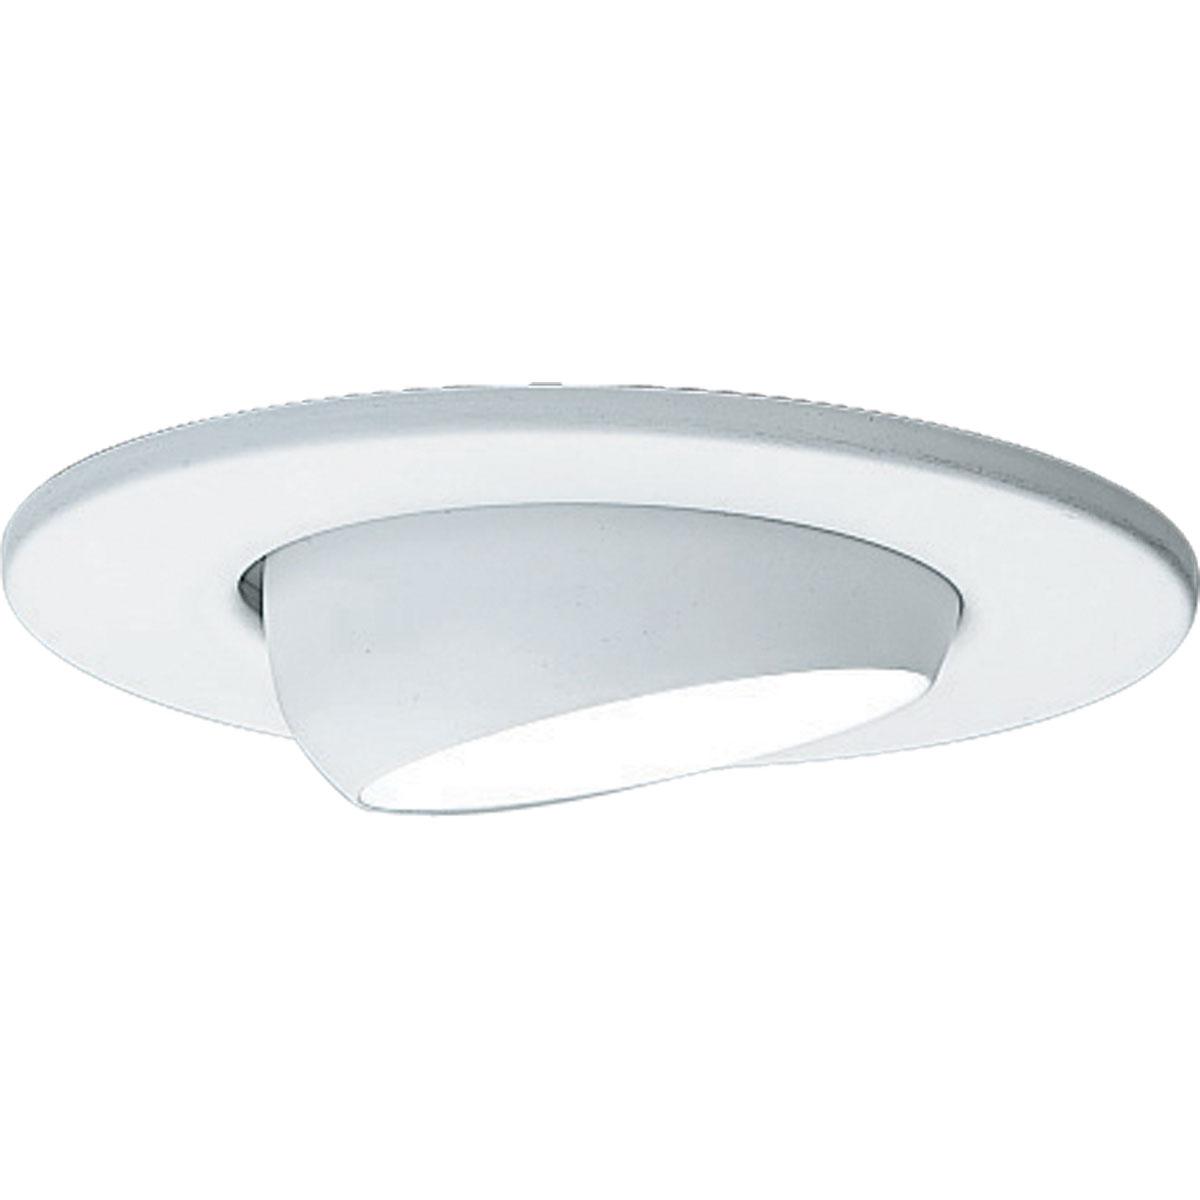 Hubbell P8046-28 4" Eyeball Trim in a White finish with white powder coated flanges to match the baffle finish. 360 positioning, tilt 20. 5" outside diameter.  ; White finish. ; White powder coated flange. ; No light leaks around trim flange.